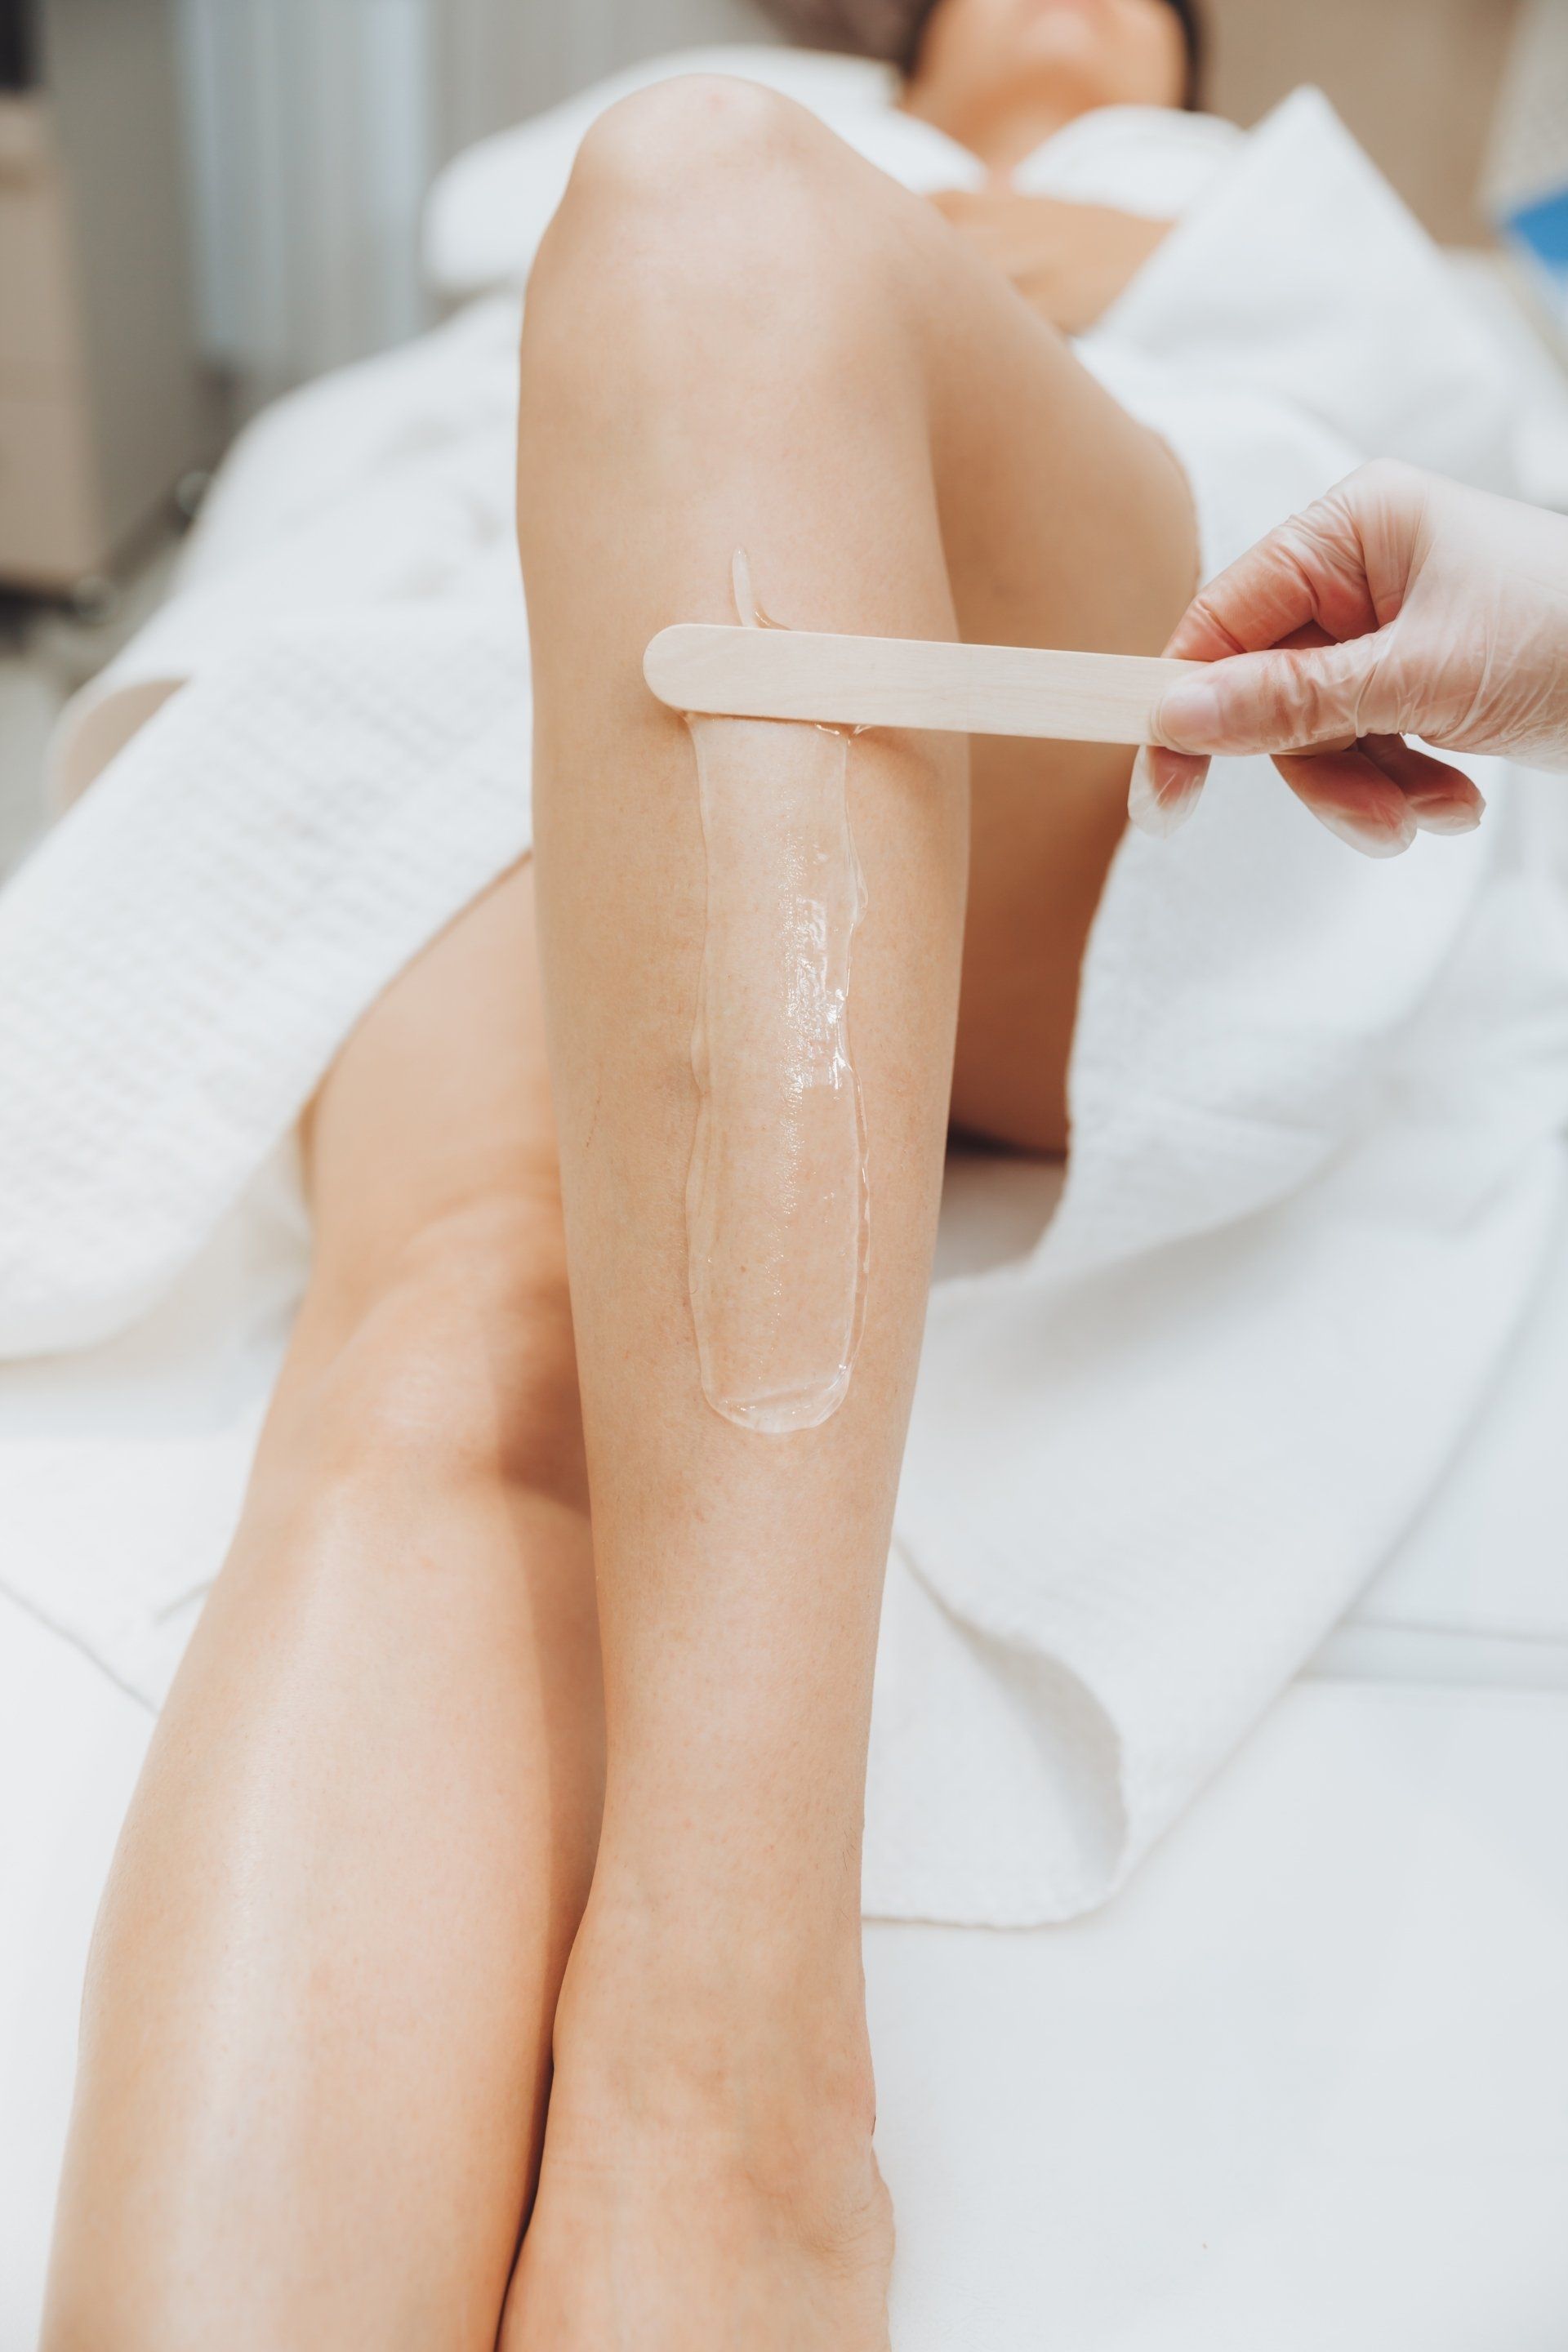 cosmetologist puts a gel for laser hair removal on leg